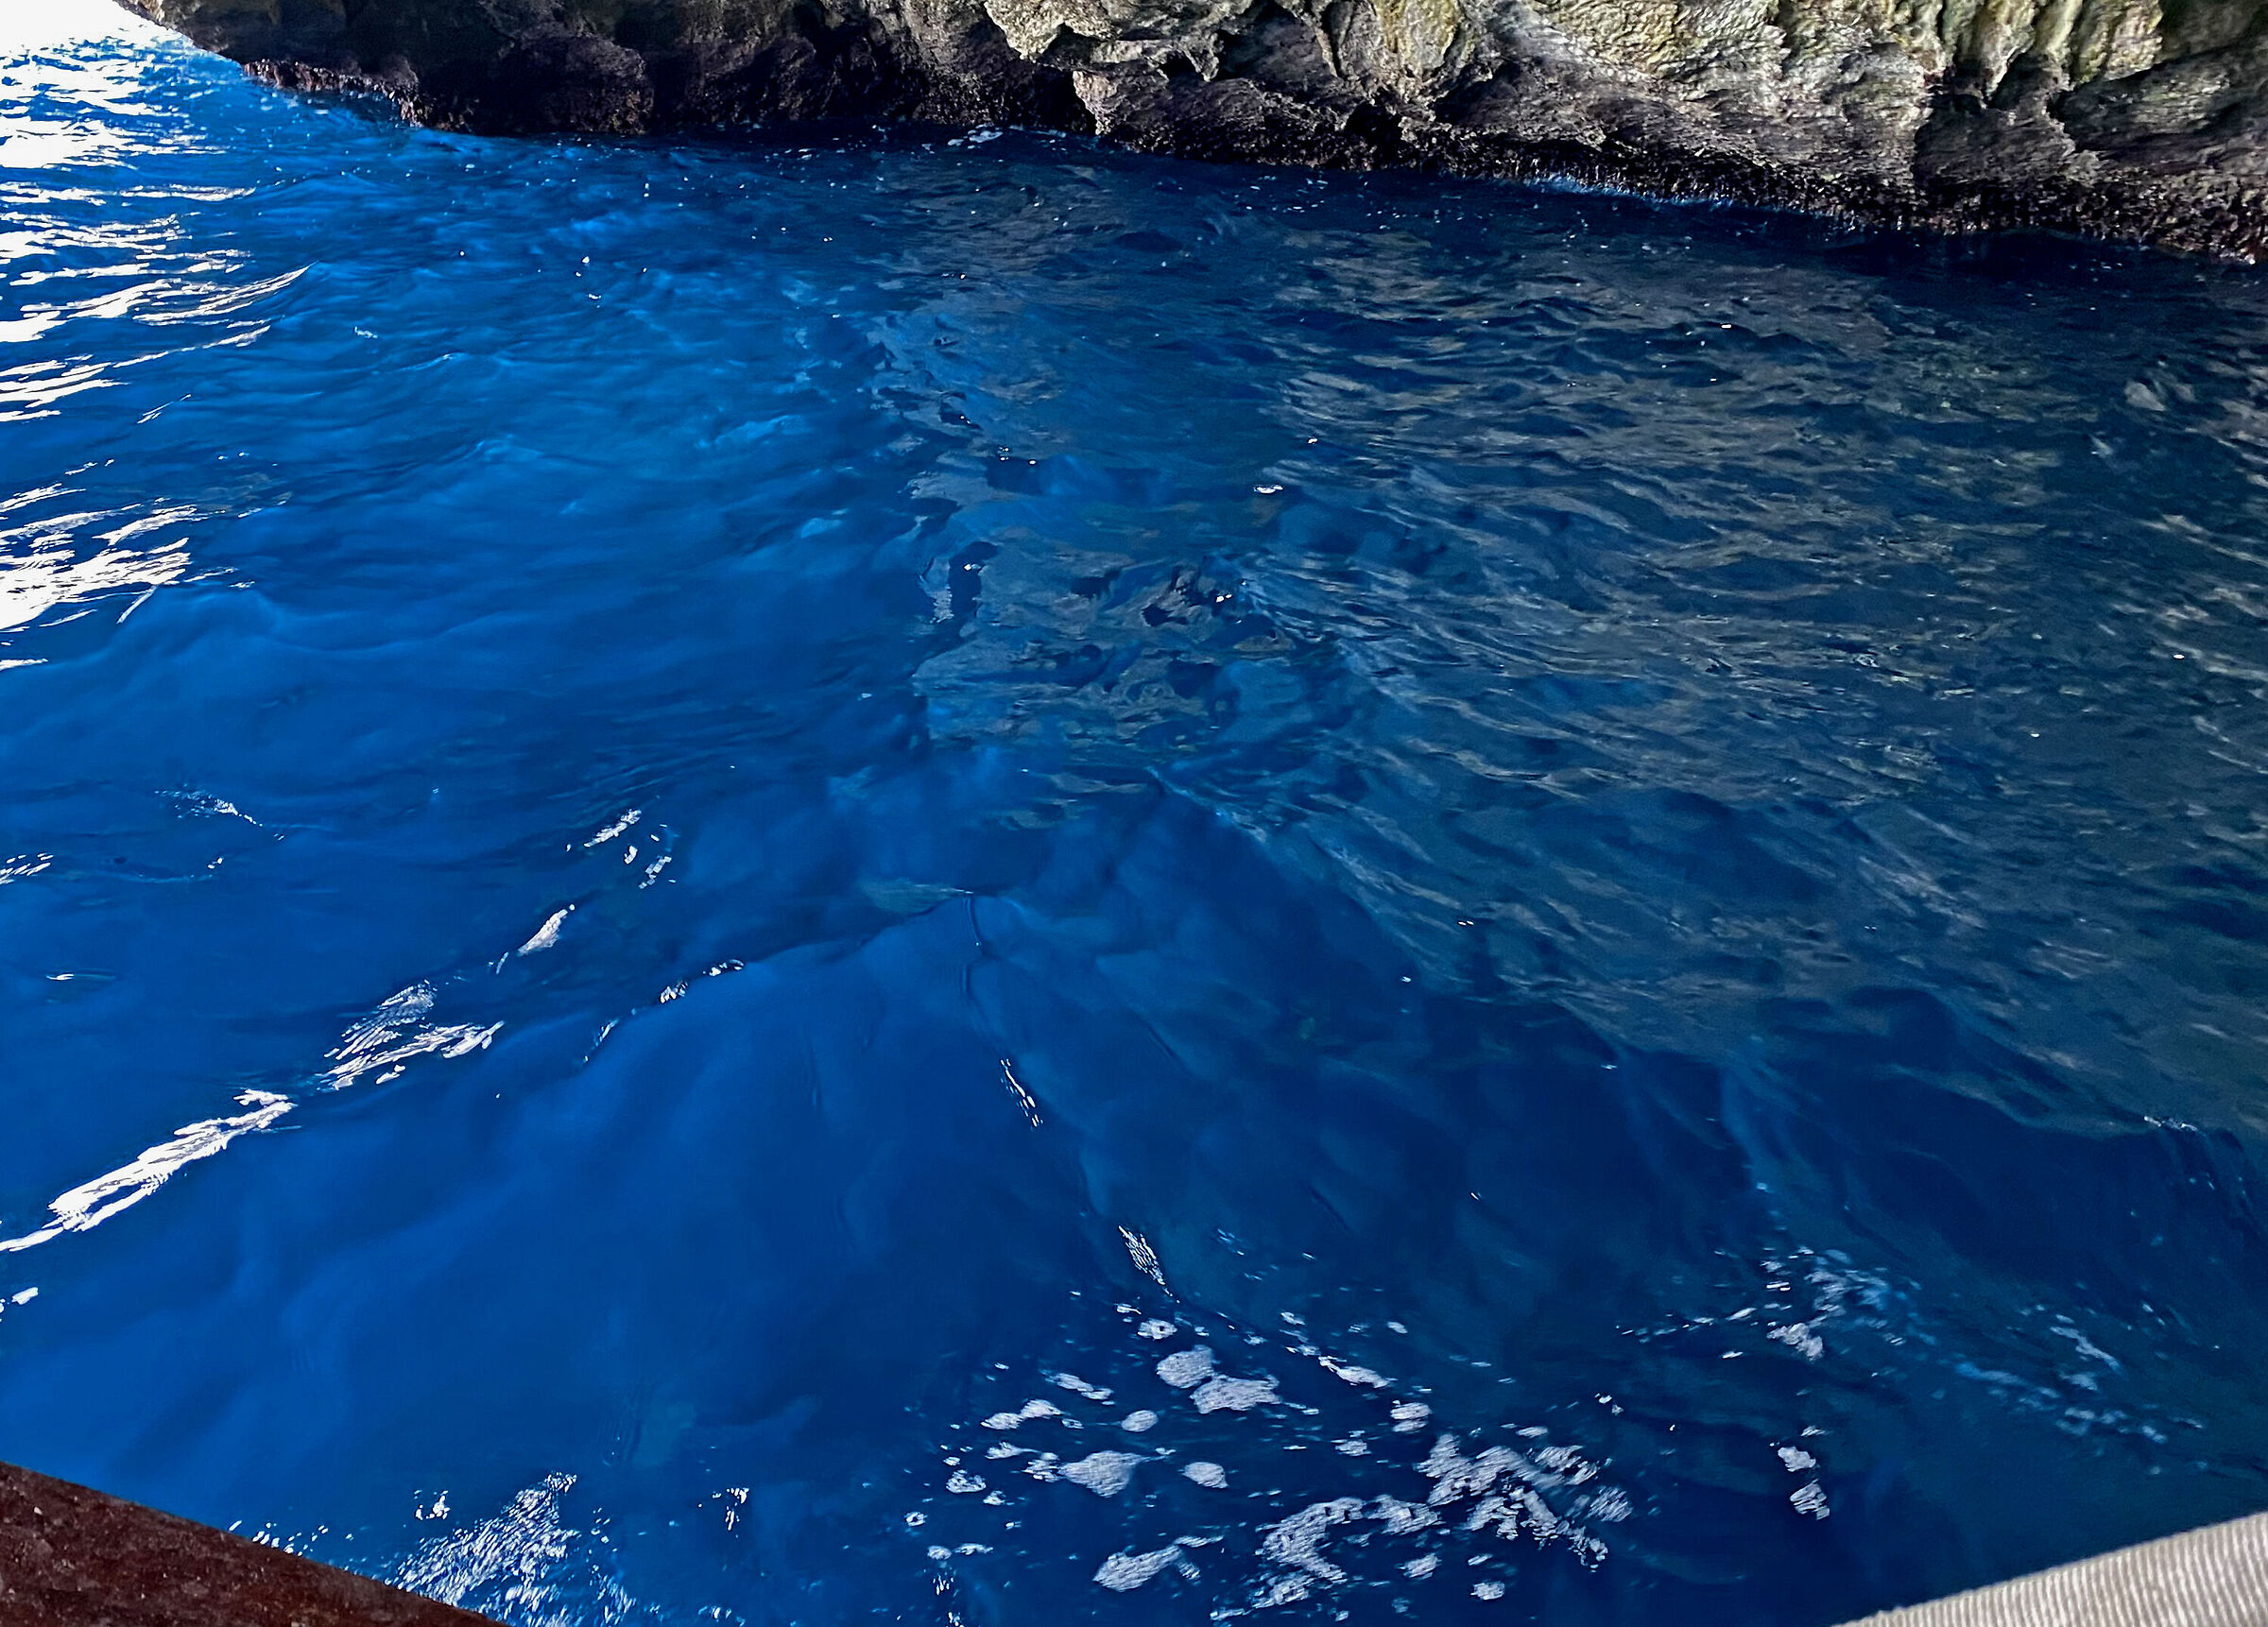 The water of the Blue Grotto...